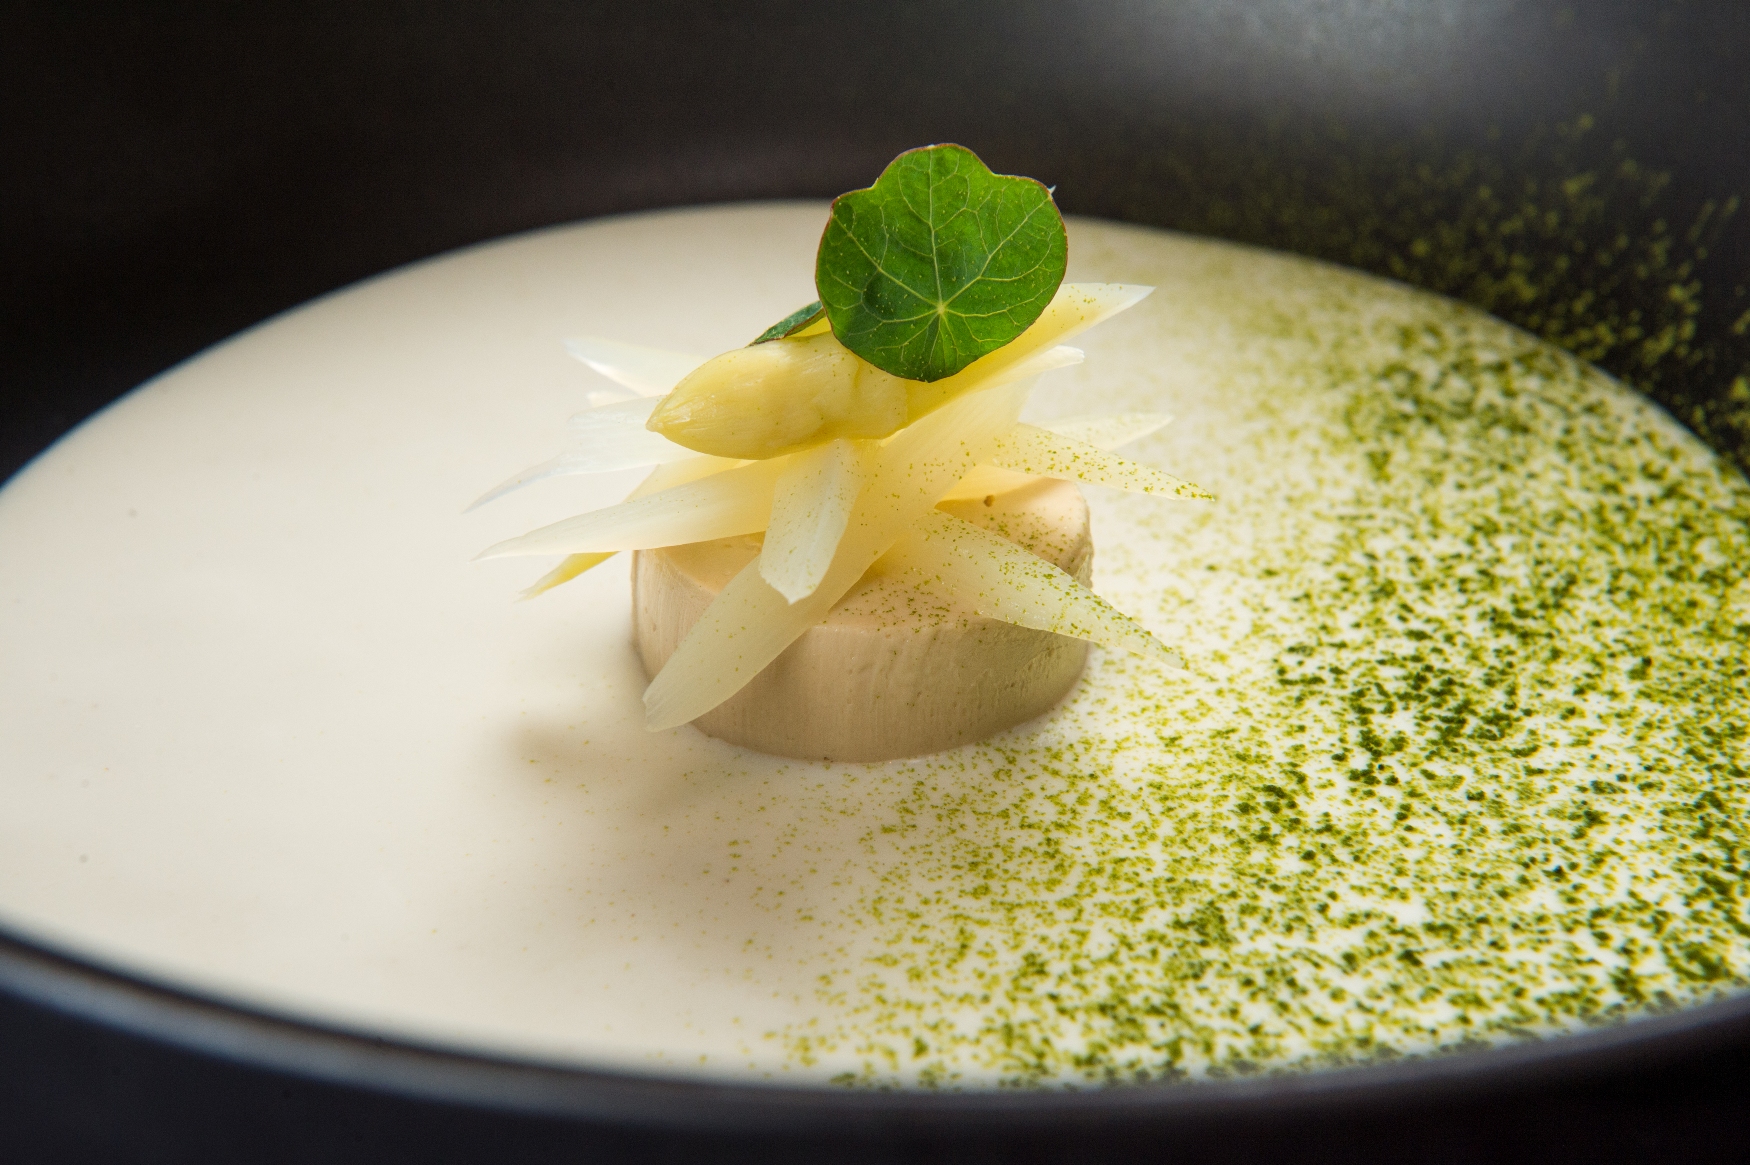 Elements_Soup of White Asparagus with Foie Gras Royale and Macha